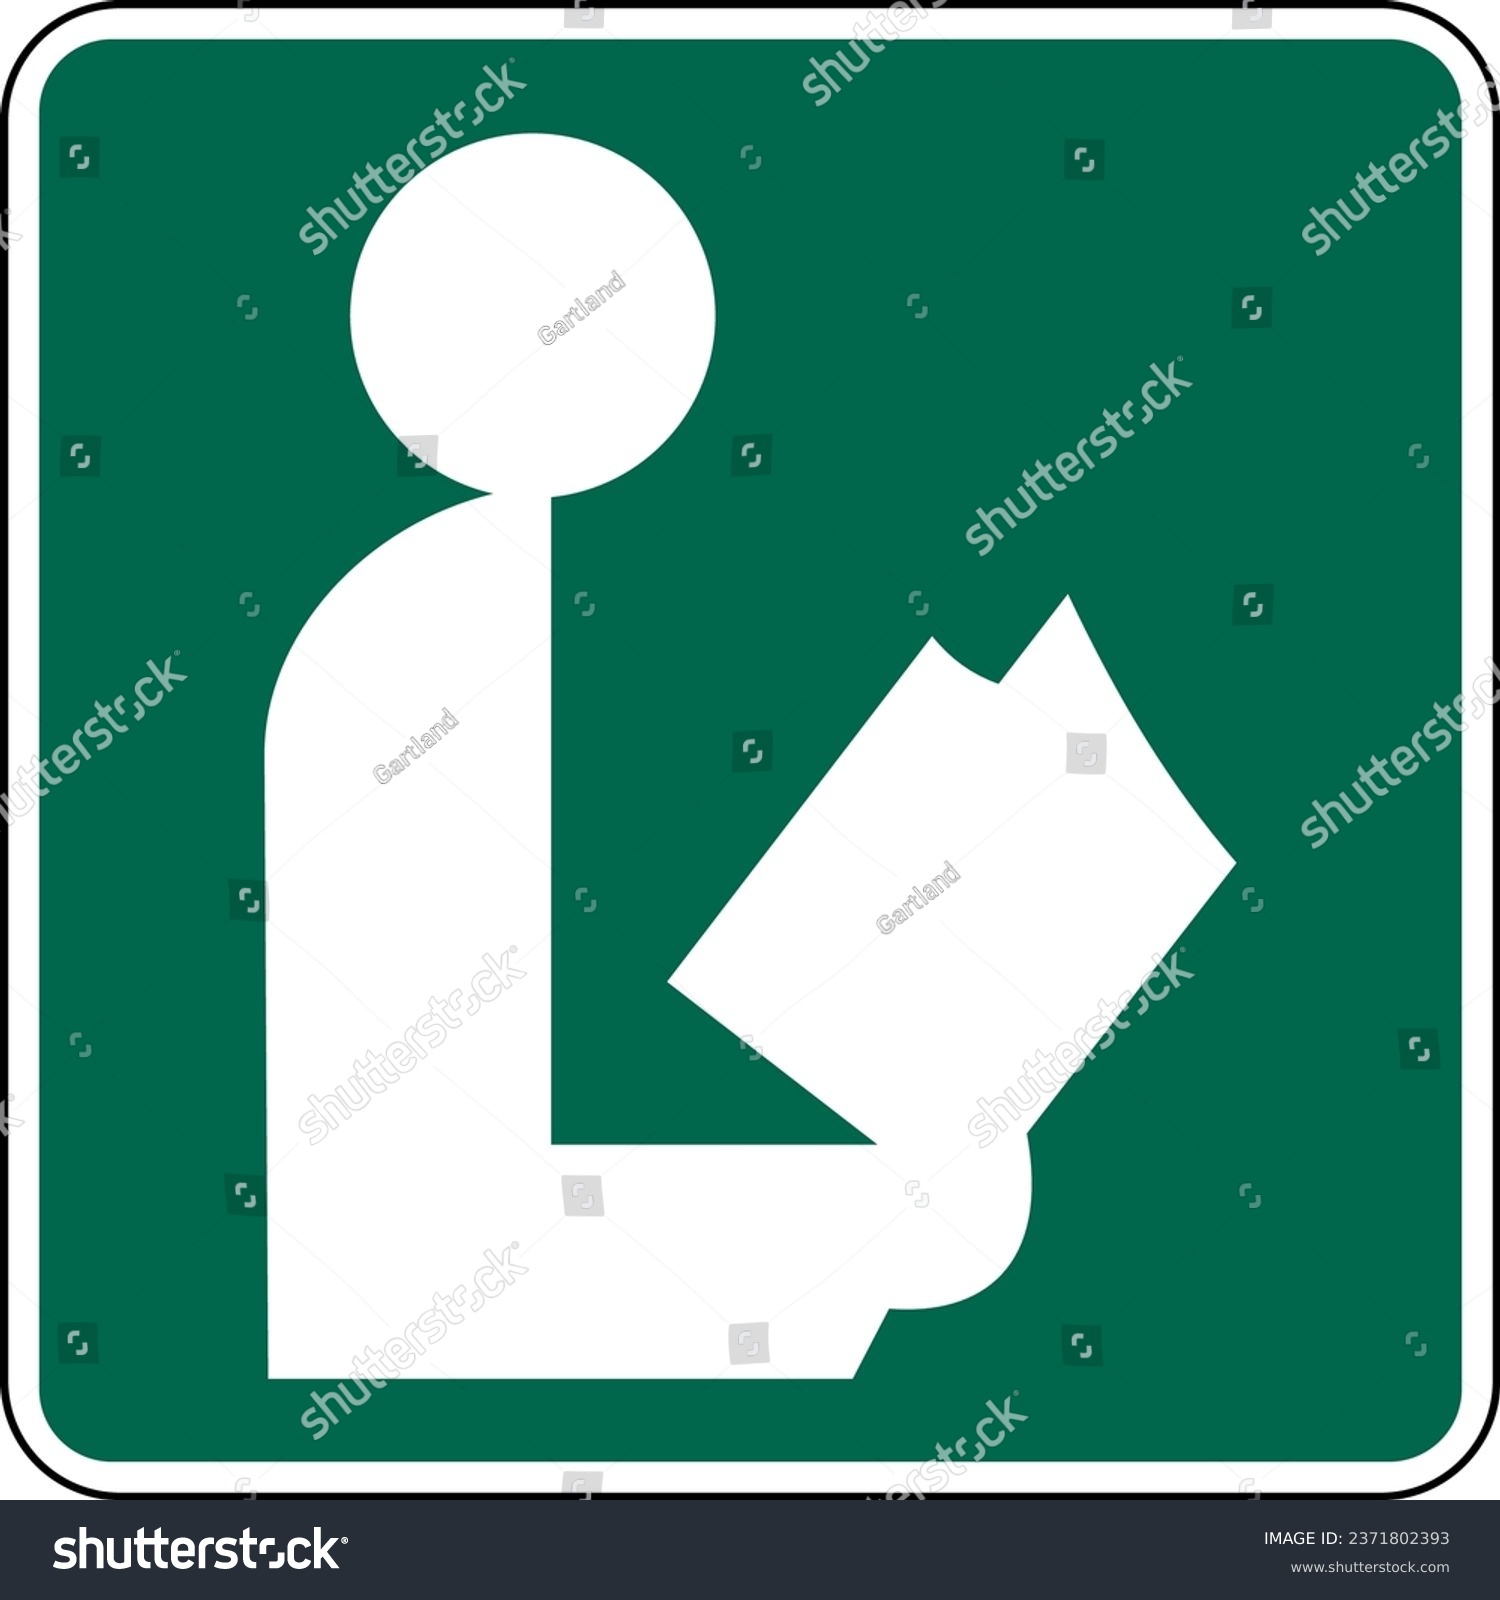 SVG of Vector graphic of a green USA Library mutcd highway sign. It consists of a silhouette of a person reading a book contained in a green square svg